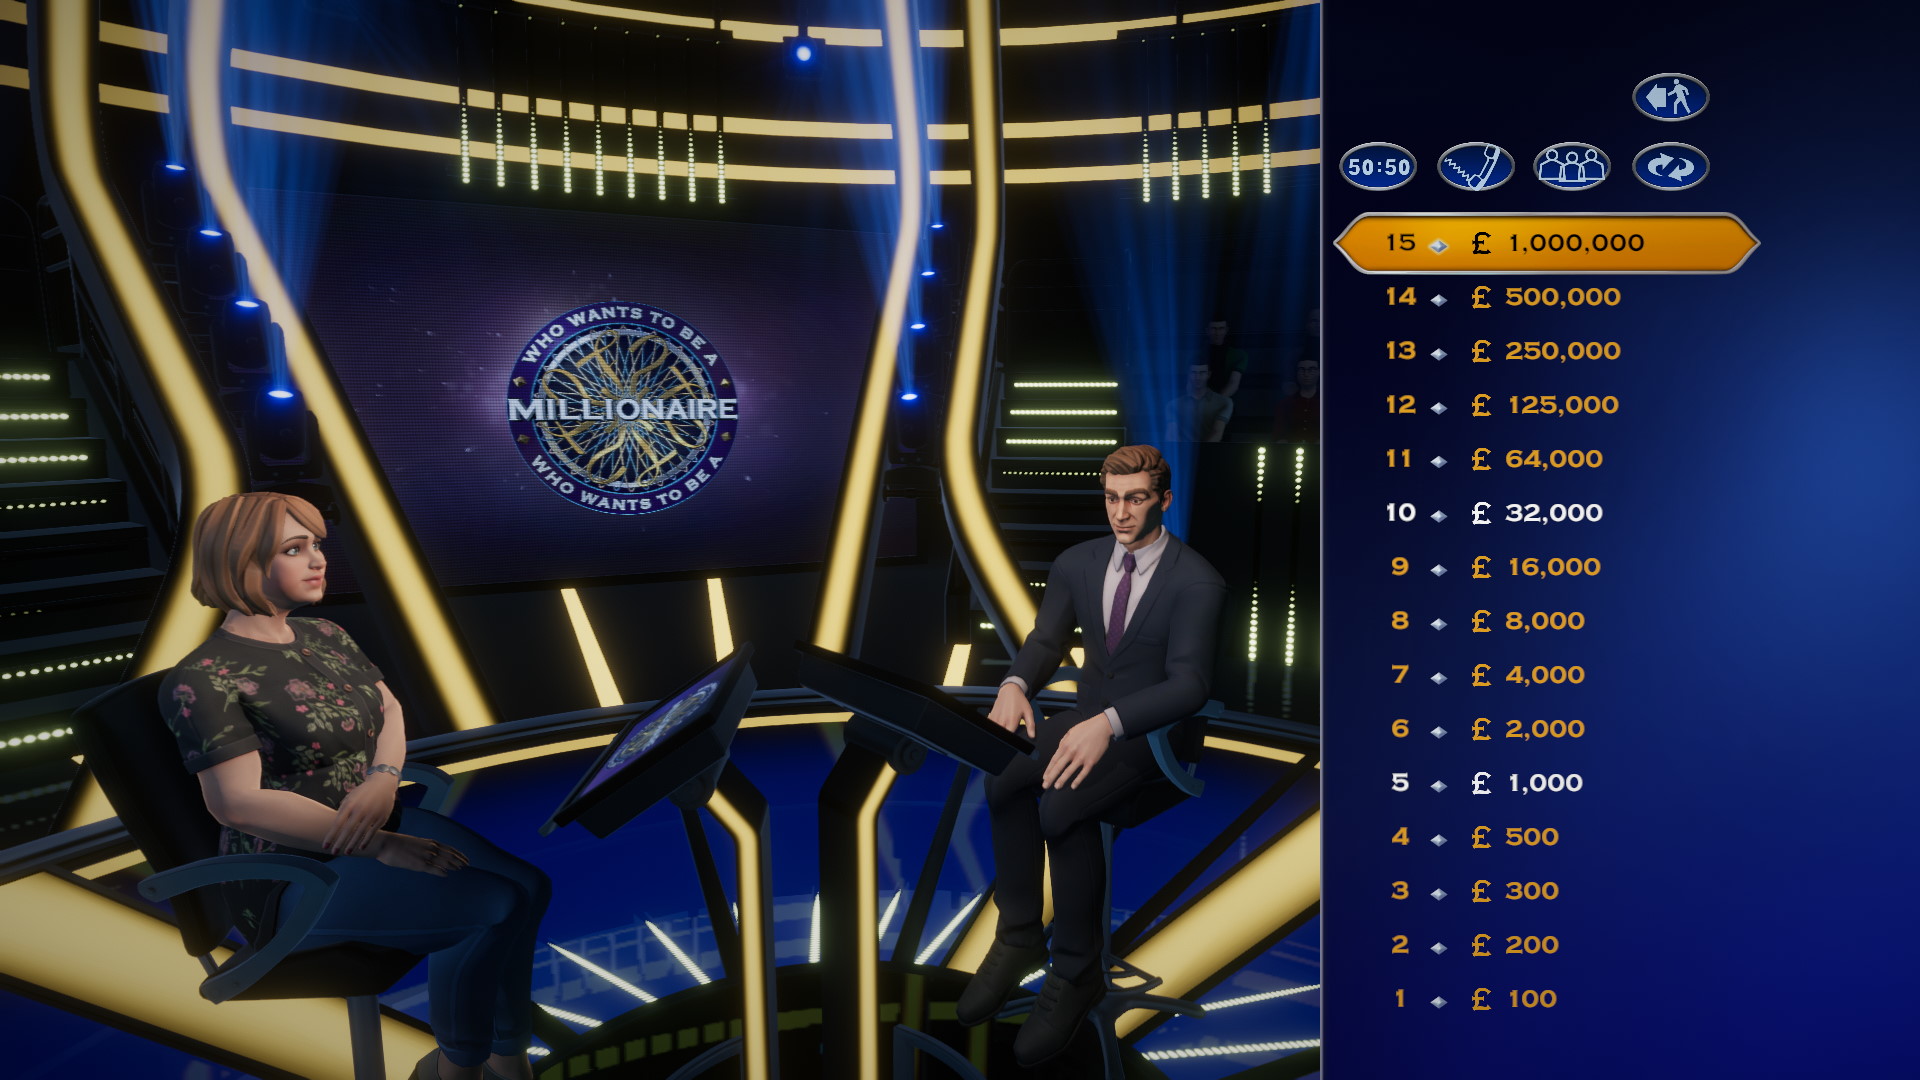 Миллионер игра где. Who wants to be a Millionaire PC game. Who wants to be a Millionaire заставка.